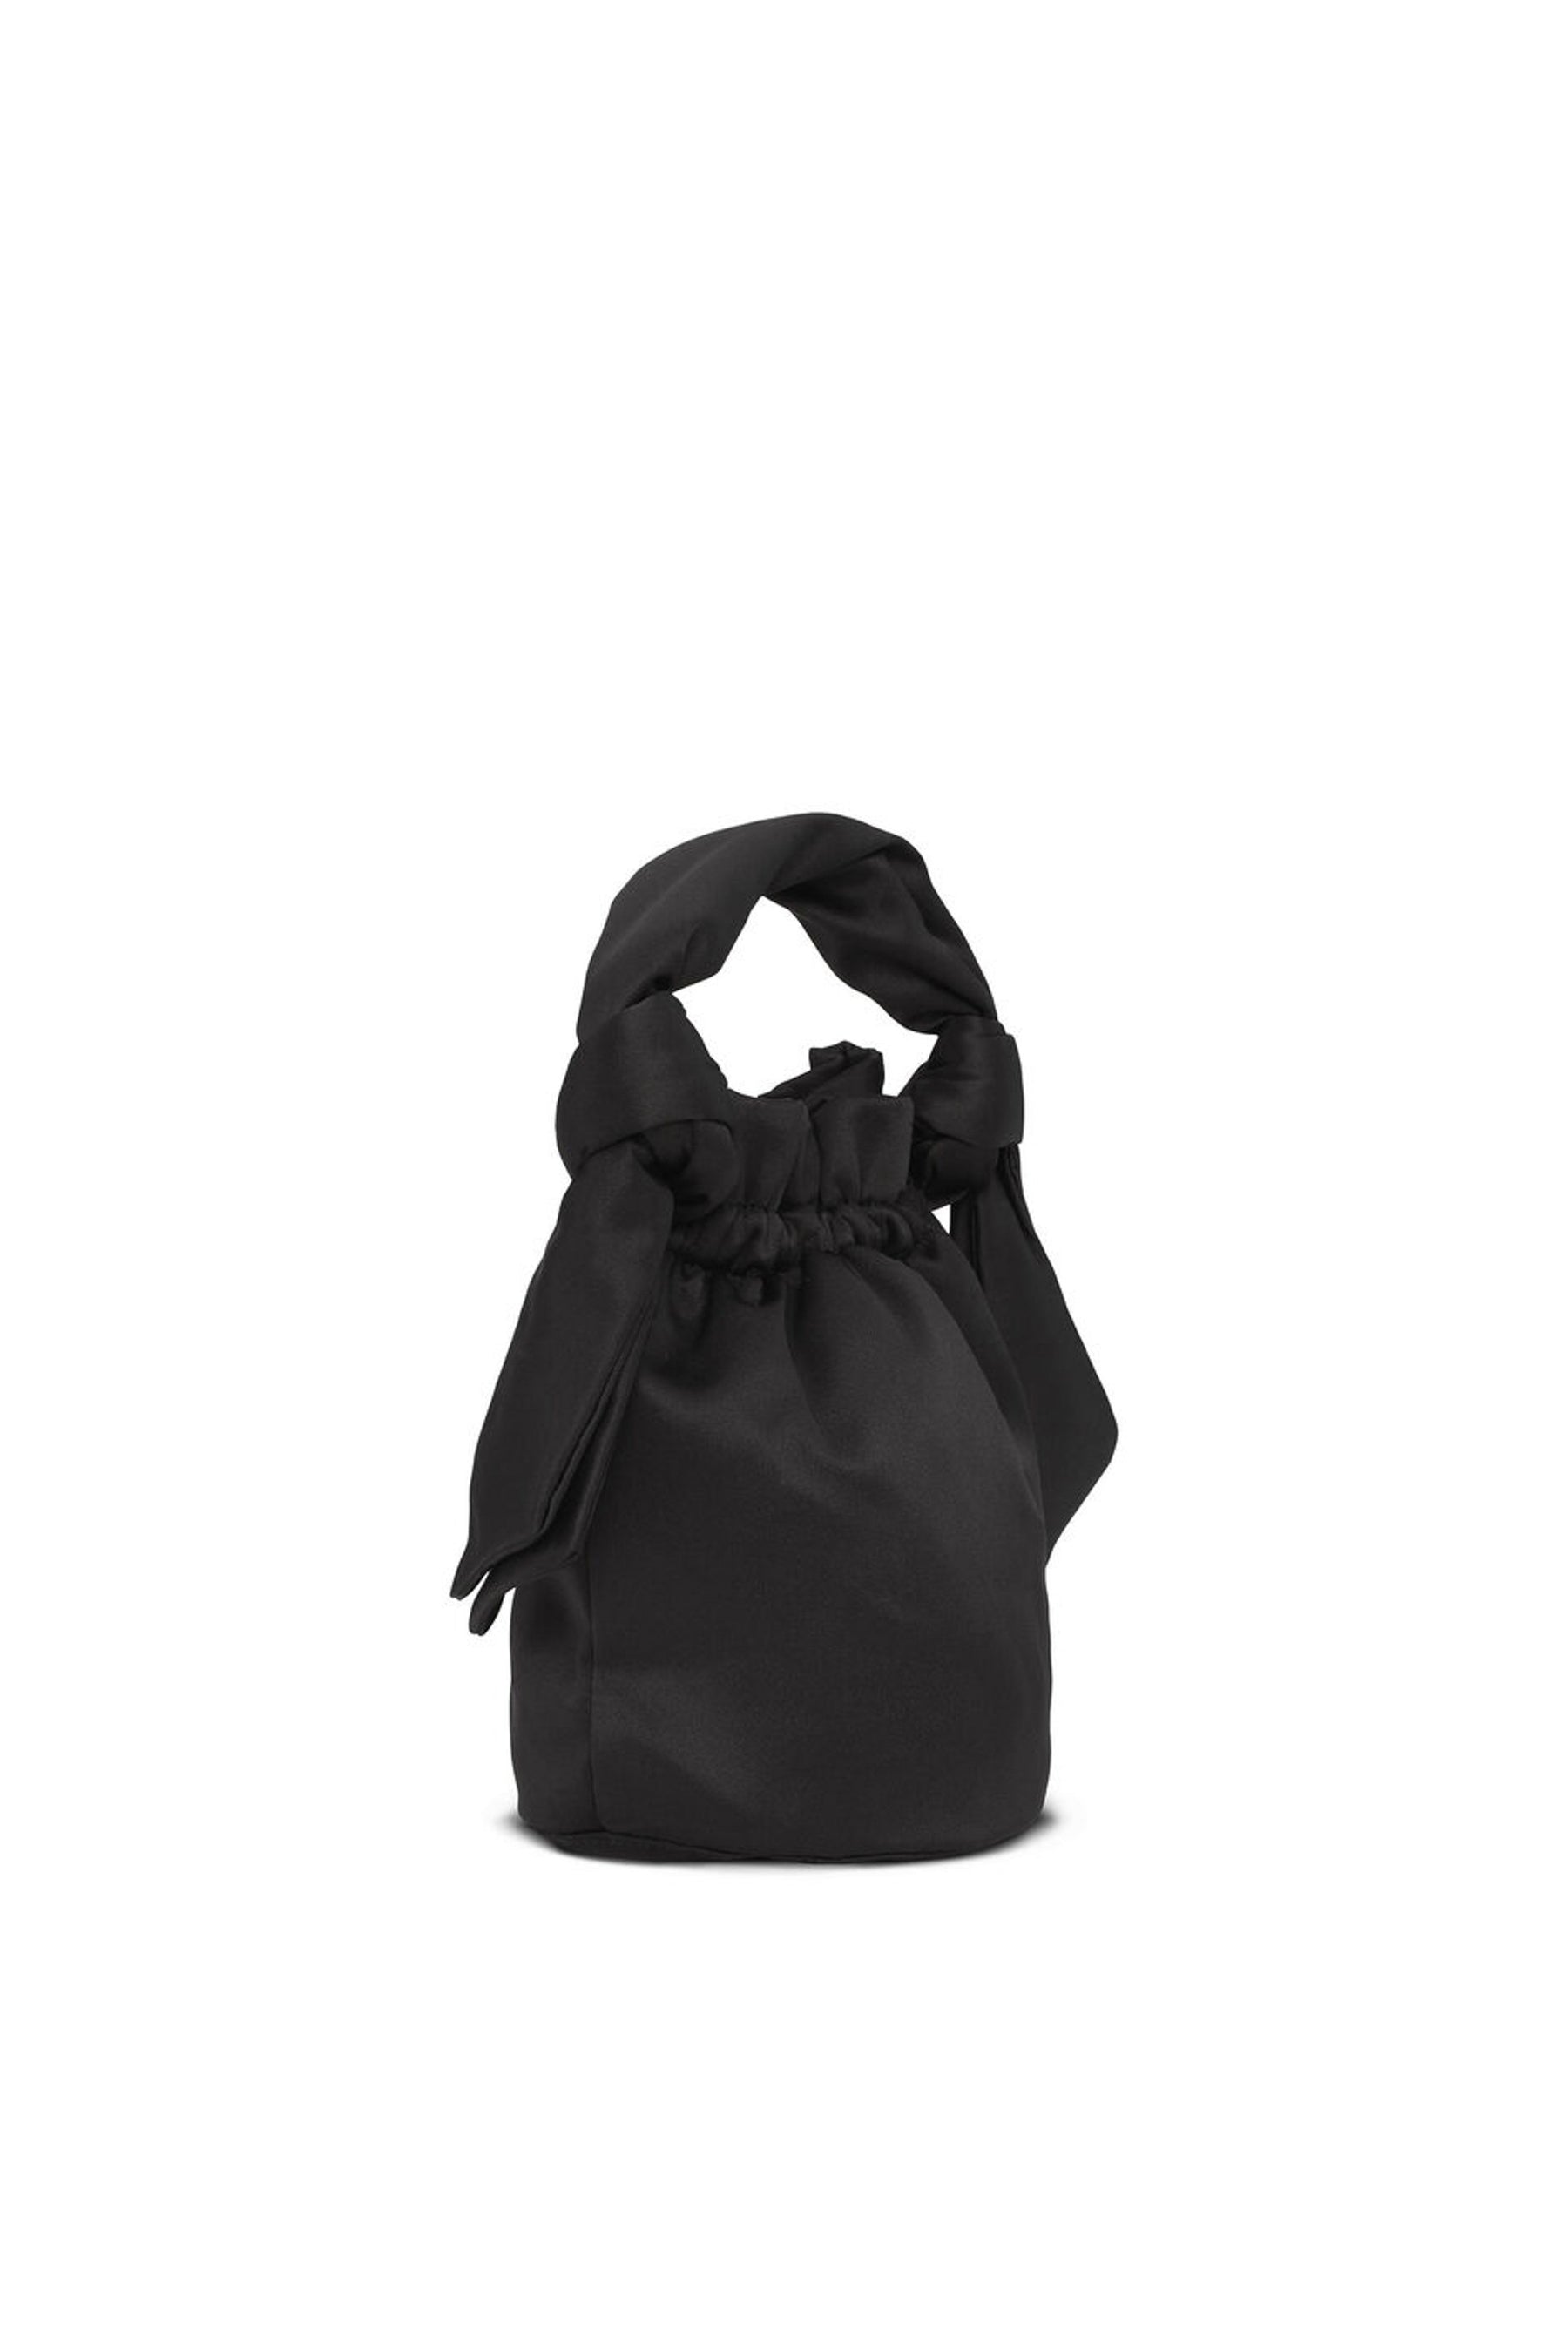 OCCASION TOP HANDLE KNOT BAG / BLK